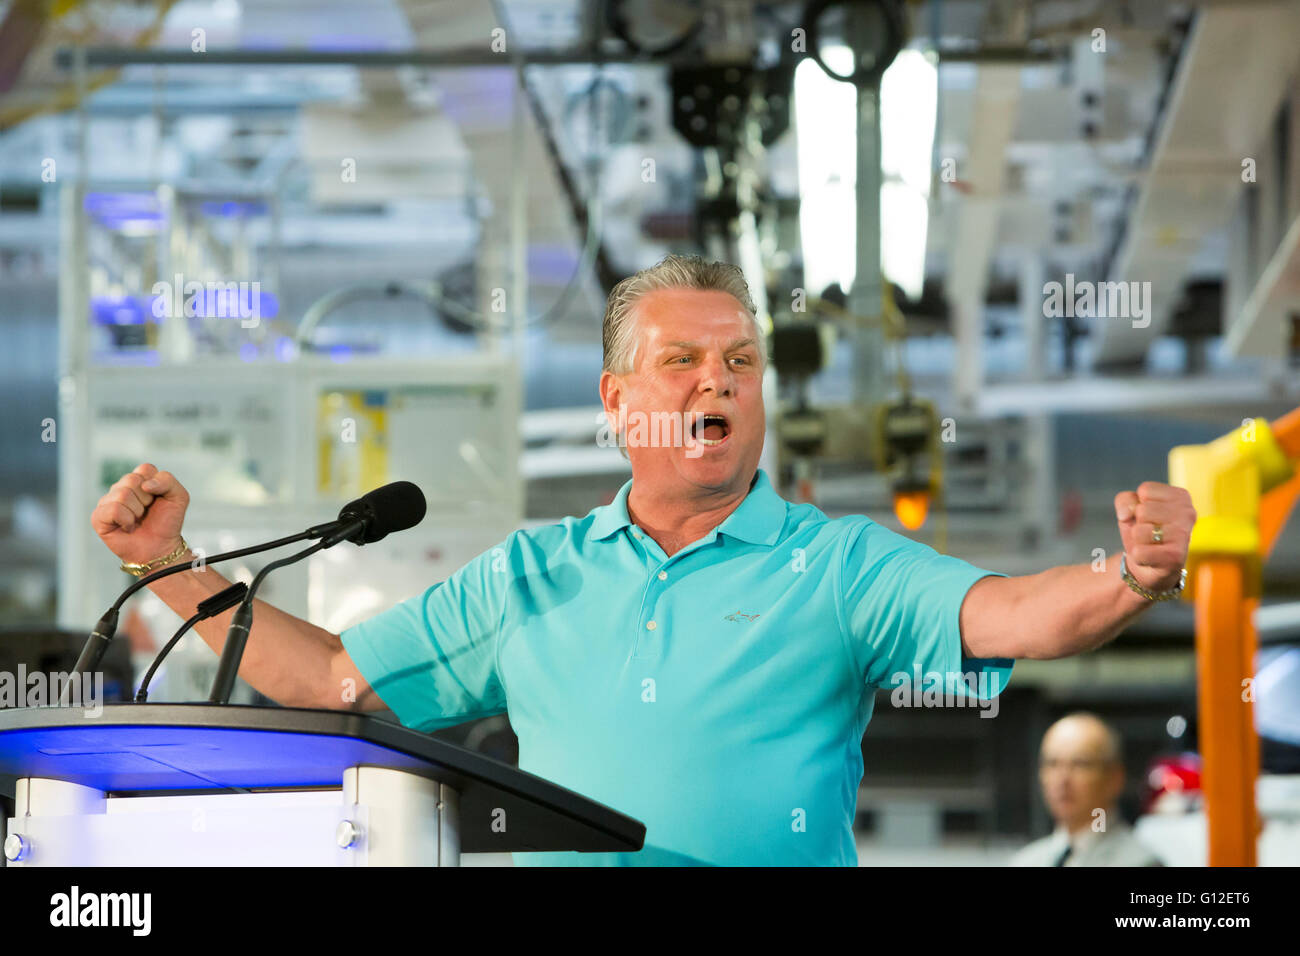 Windsor, Ontario Canada - Former Canadian Auto Workers President Ken Lewenza speaks at Fiat Chrysler Automobiles' Windsor Assemb Stock Photo